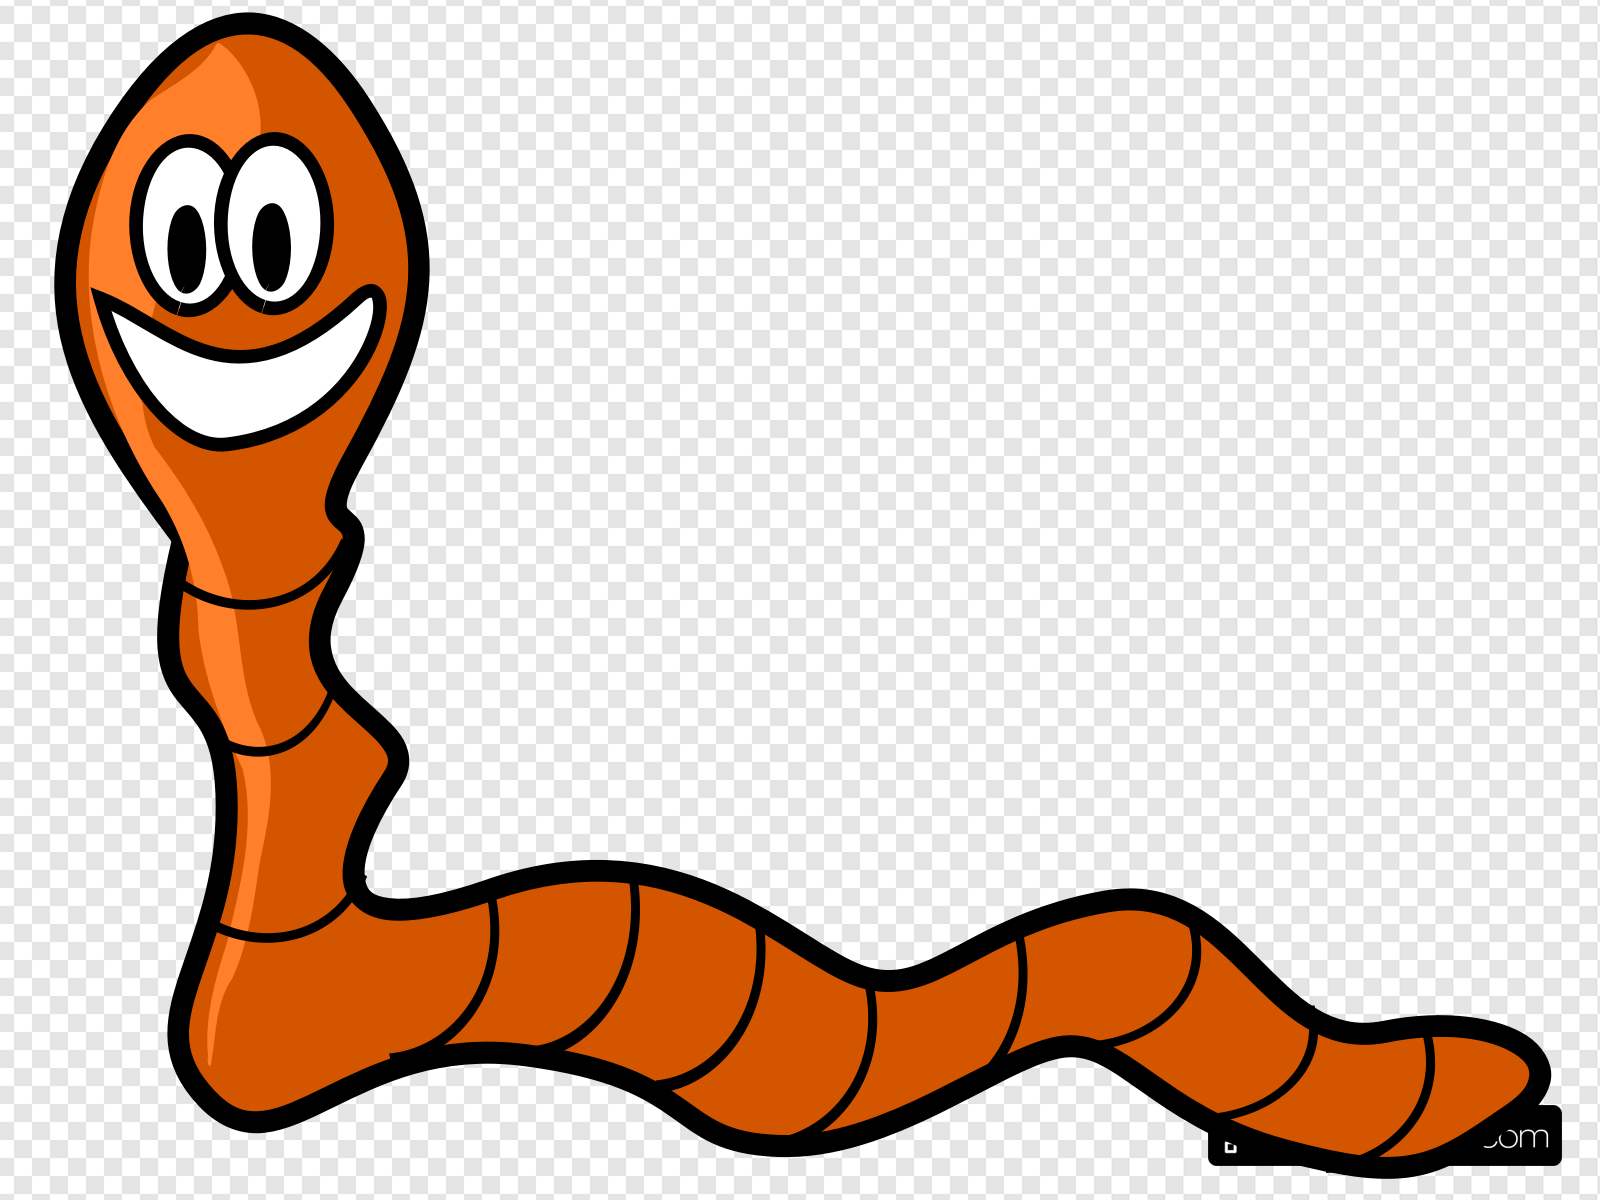 Clip art icon and. Worm clipart svg